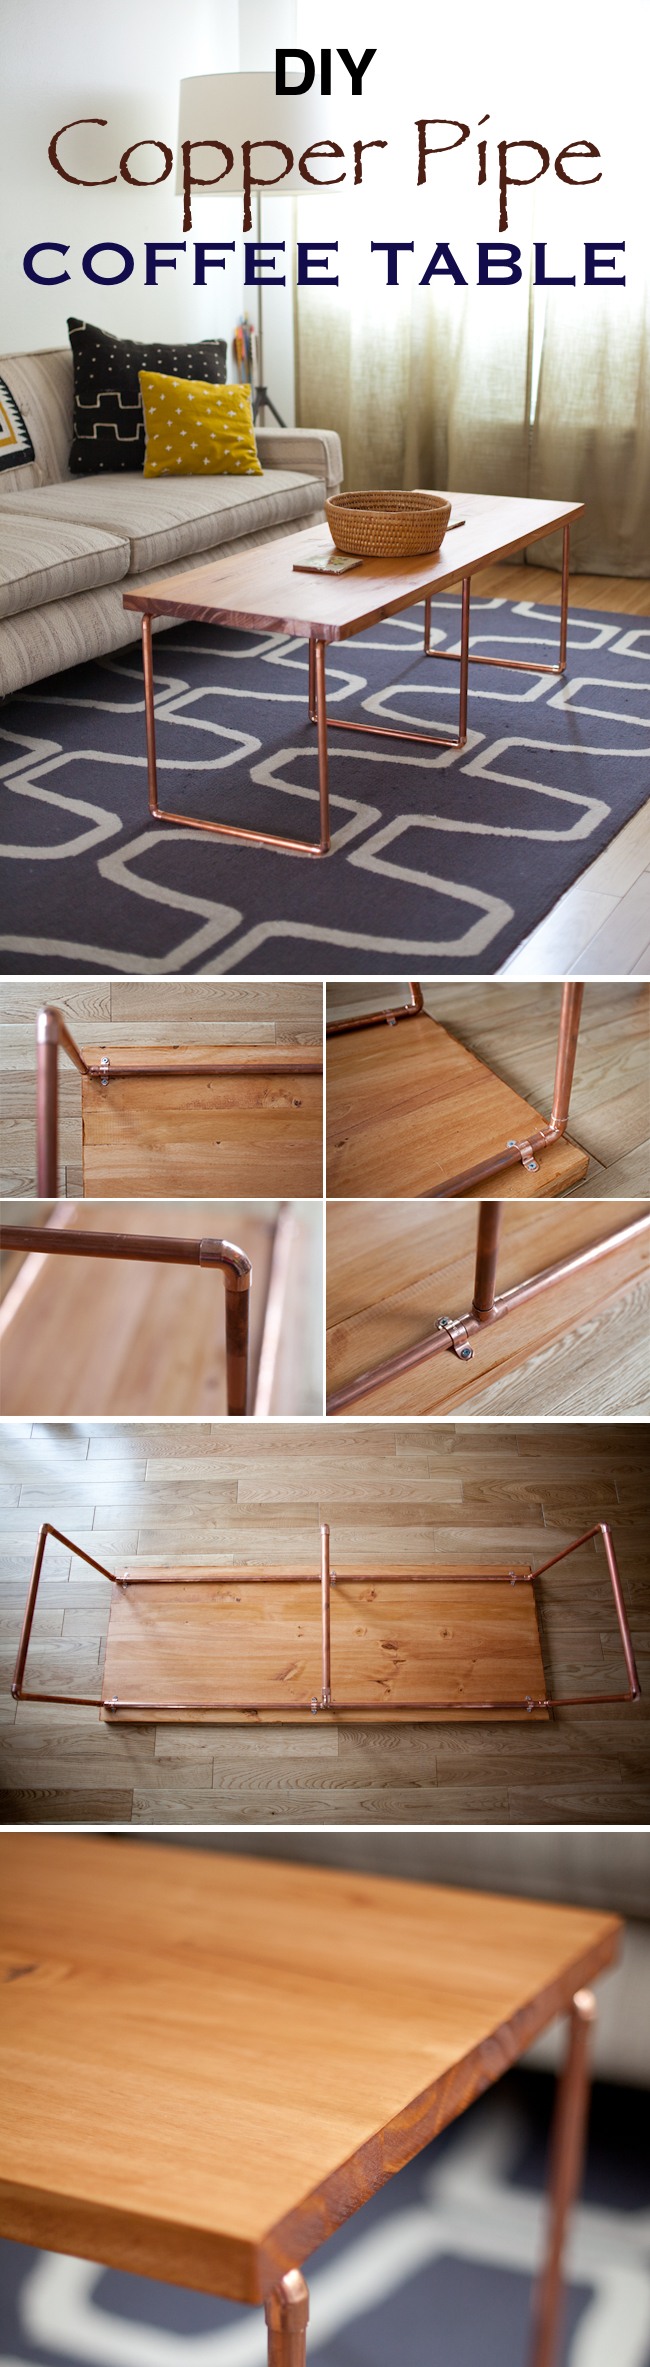 DIY Copper Pipe Coffee Table